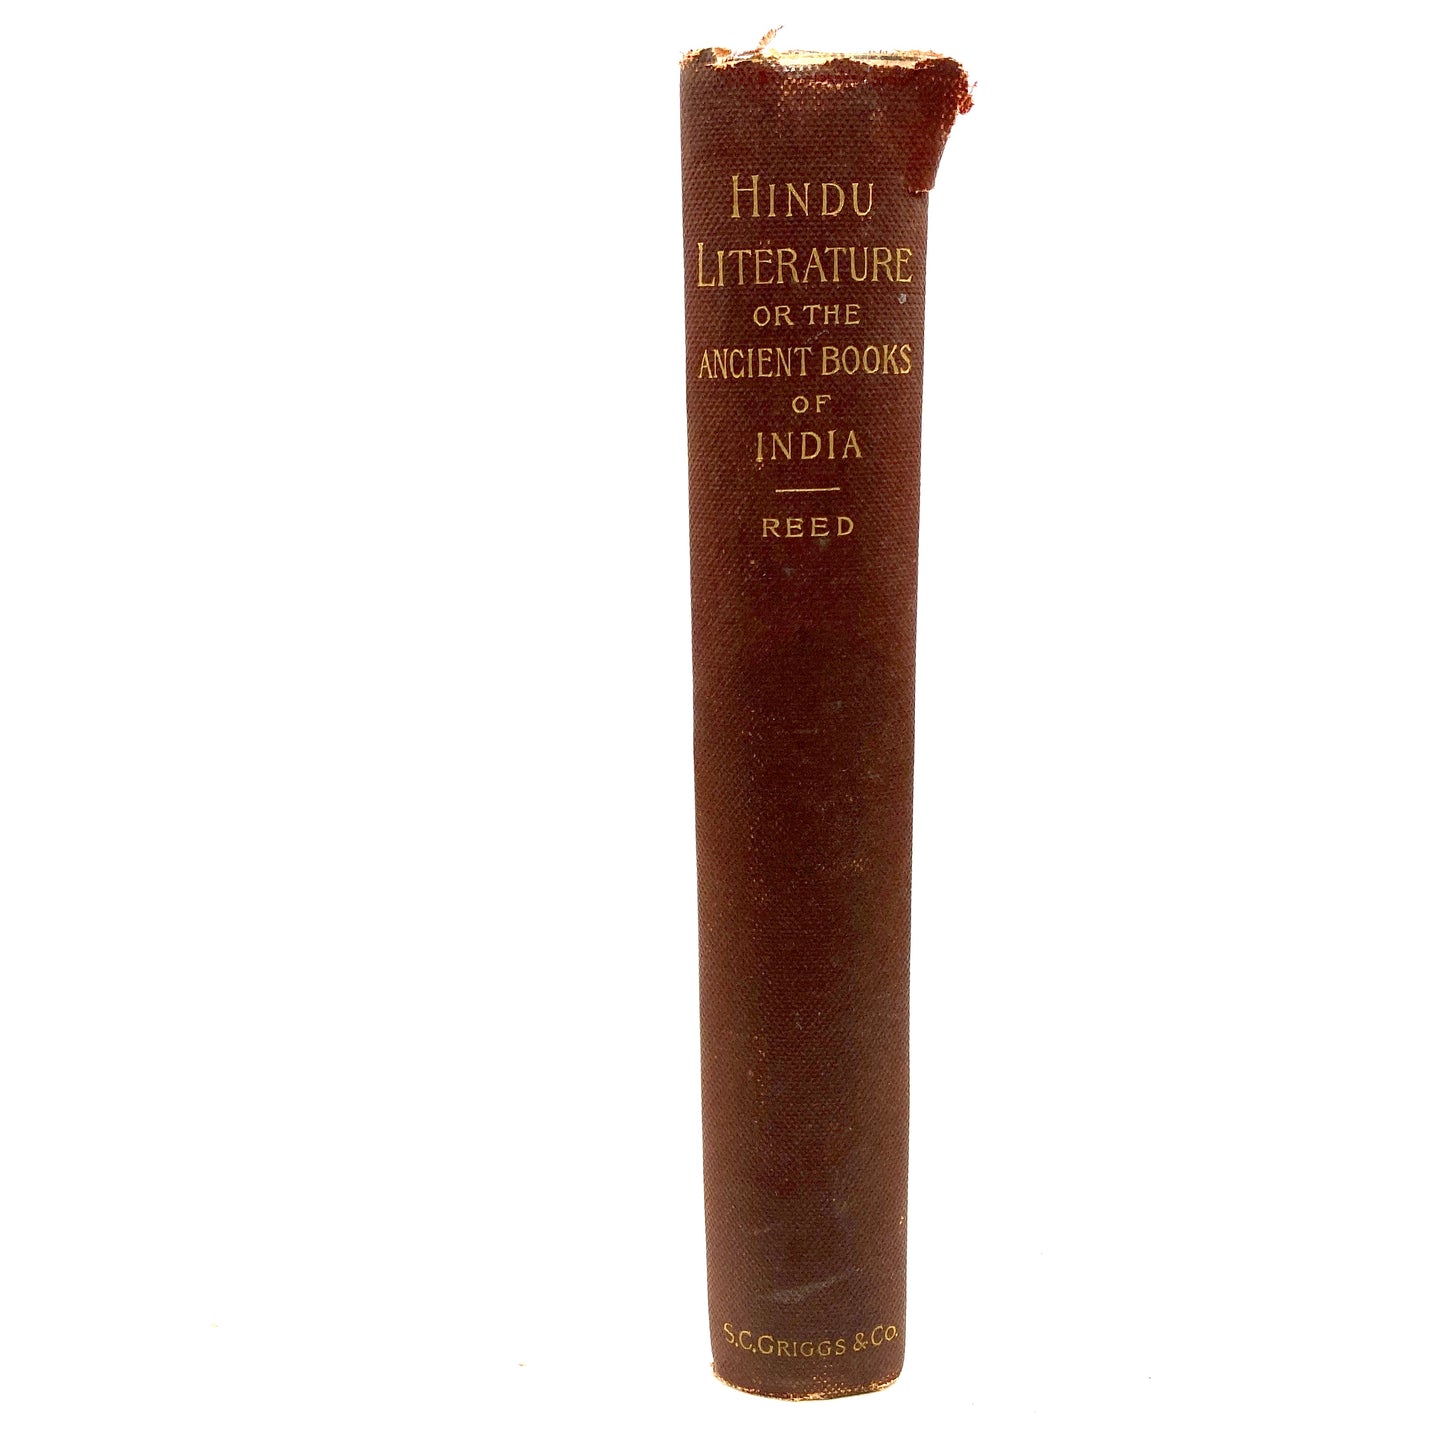 REED, Elizabeth A. "Hindu Literature or The Ancient Books of India" [S.C. Griggs, 1891]